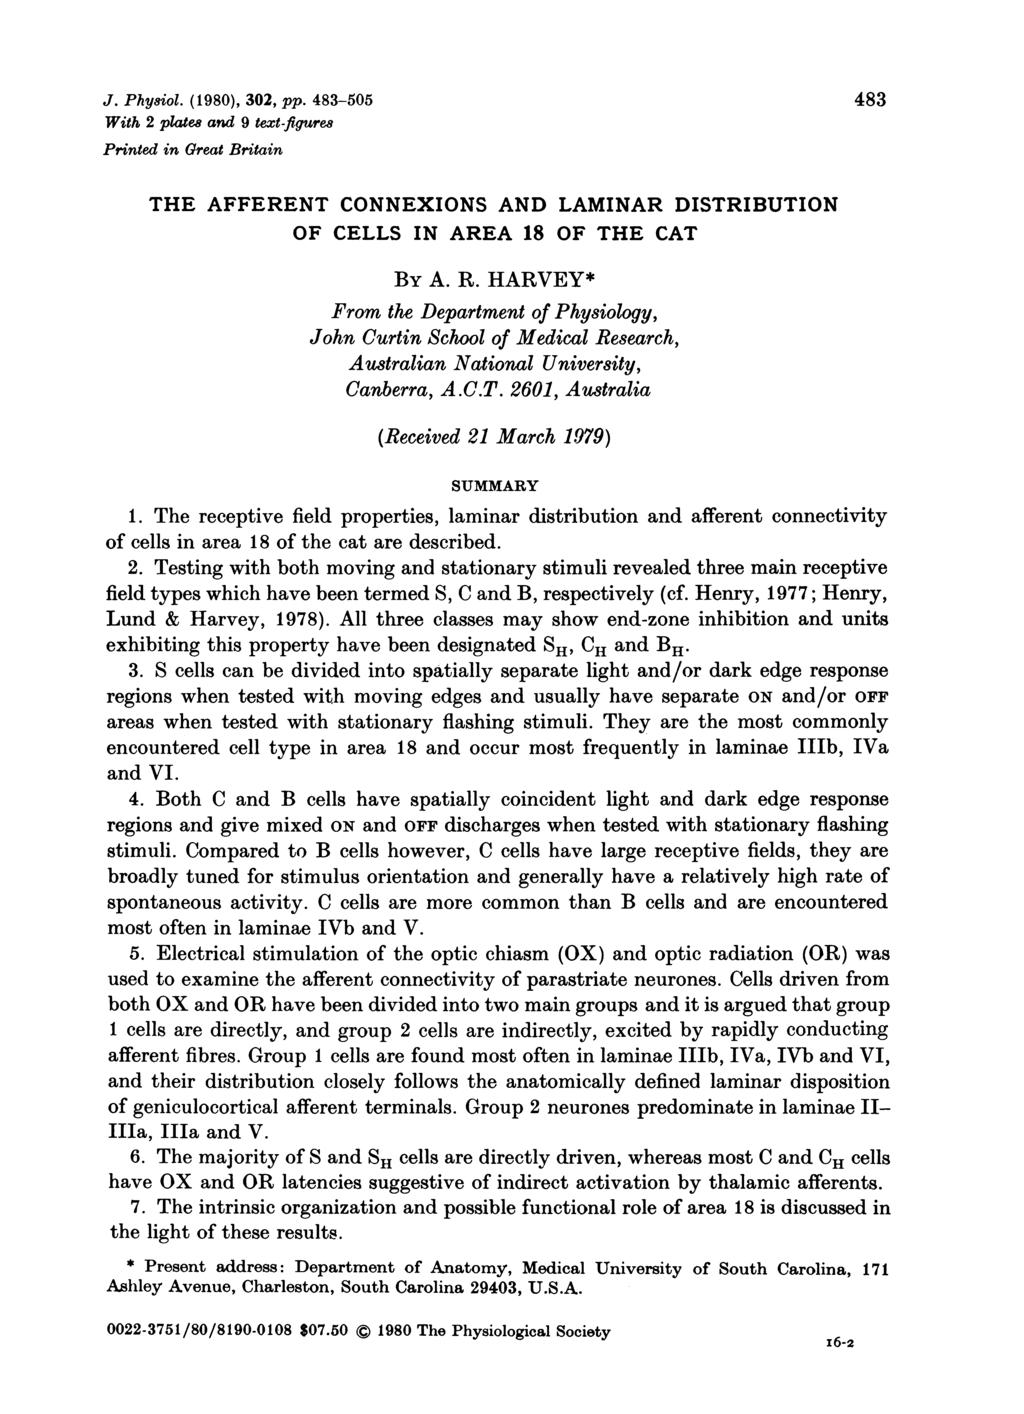 J. Physiol. (1980), 302, pp. 483-505 483 With 2 plate and 9 text-ftigurew Printed in Great Britain THE AFFERENT CONNEXIONS AND LAMINAR DISTRIBUTION OF CELLS IN AREA 18 OF THE CAT BY A. R.